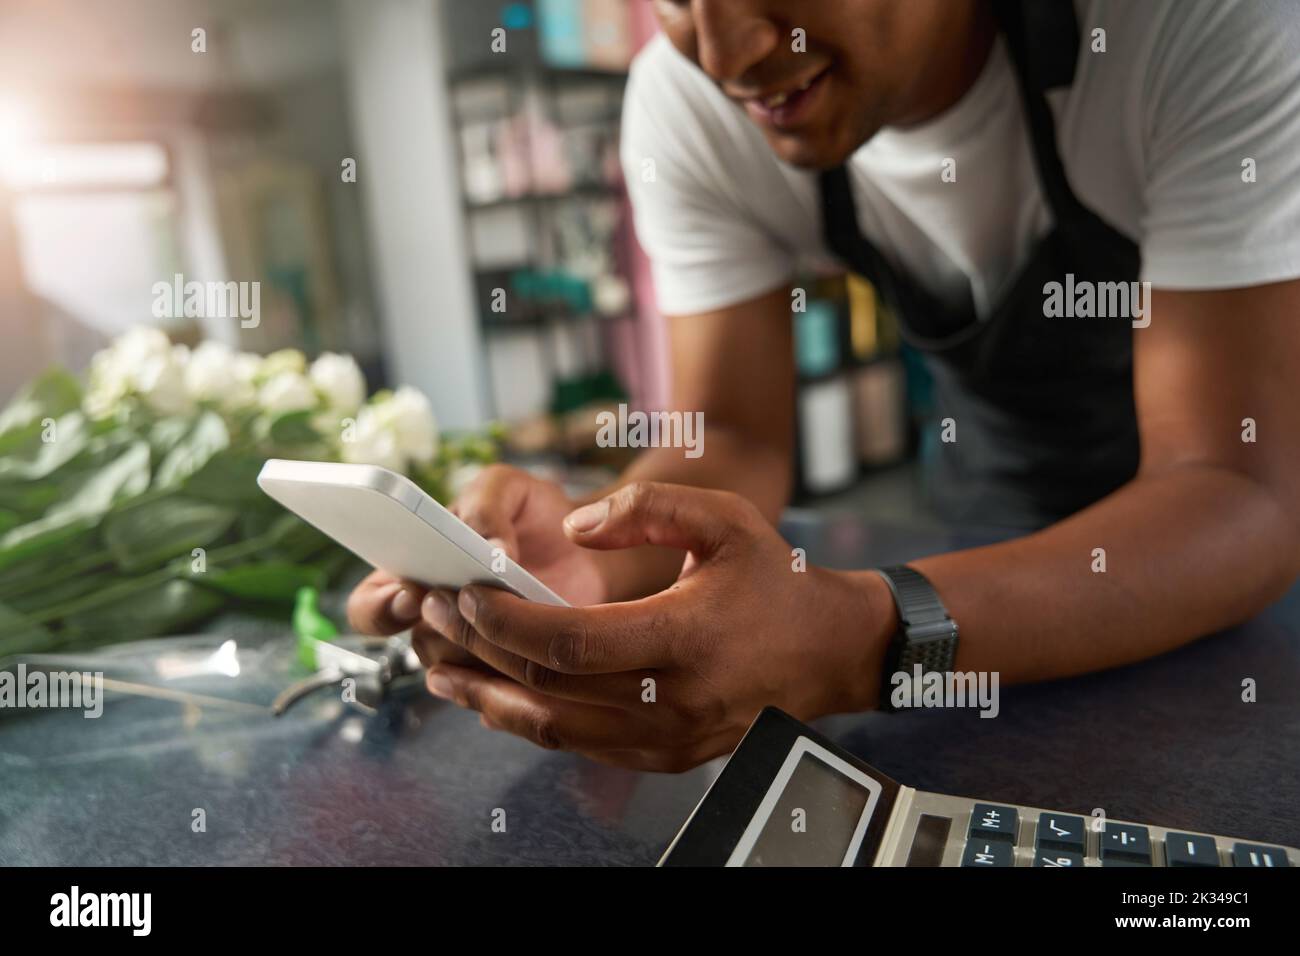 Flower shop employee in front of flowers Stock Photo